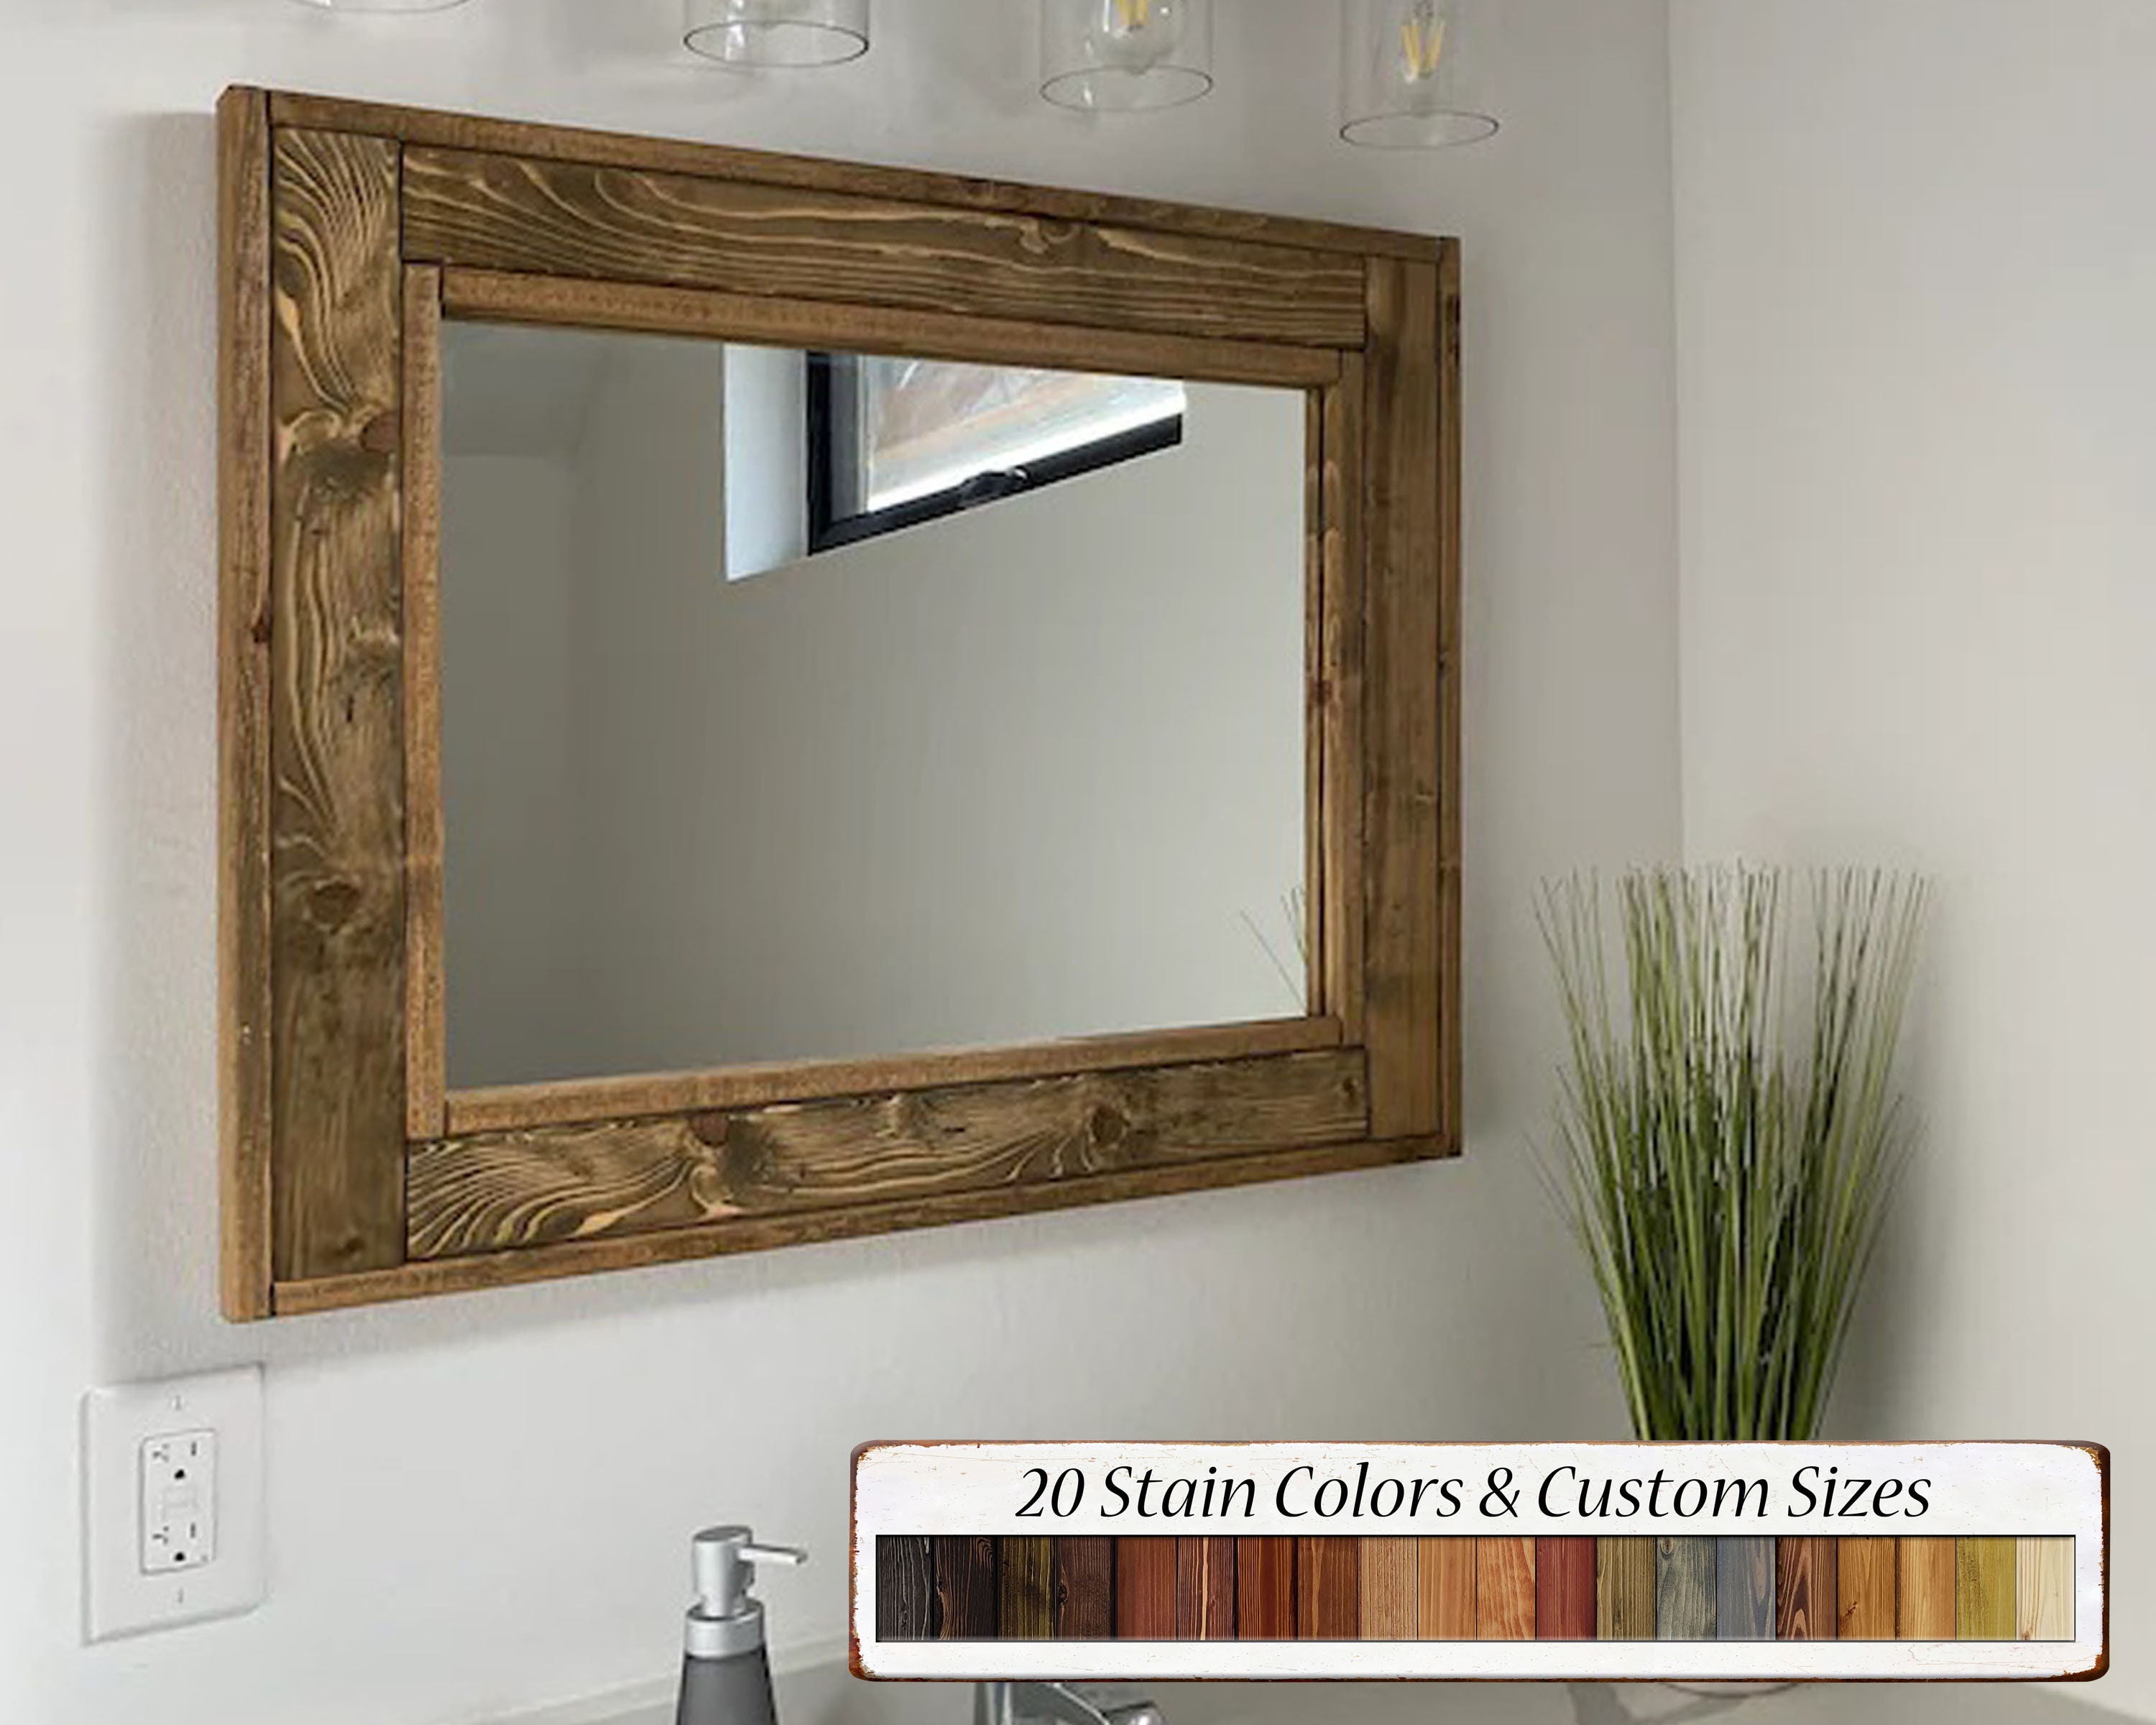 Driftwood 36 in. x 36 in. Mirror Frame Kit in White - Mirror Not Included